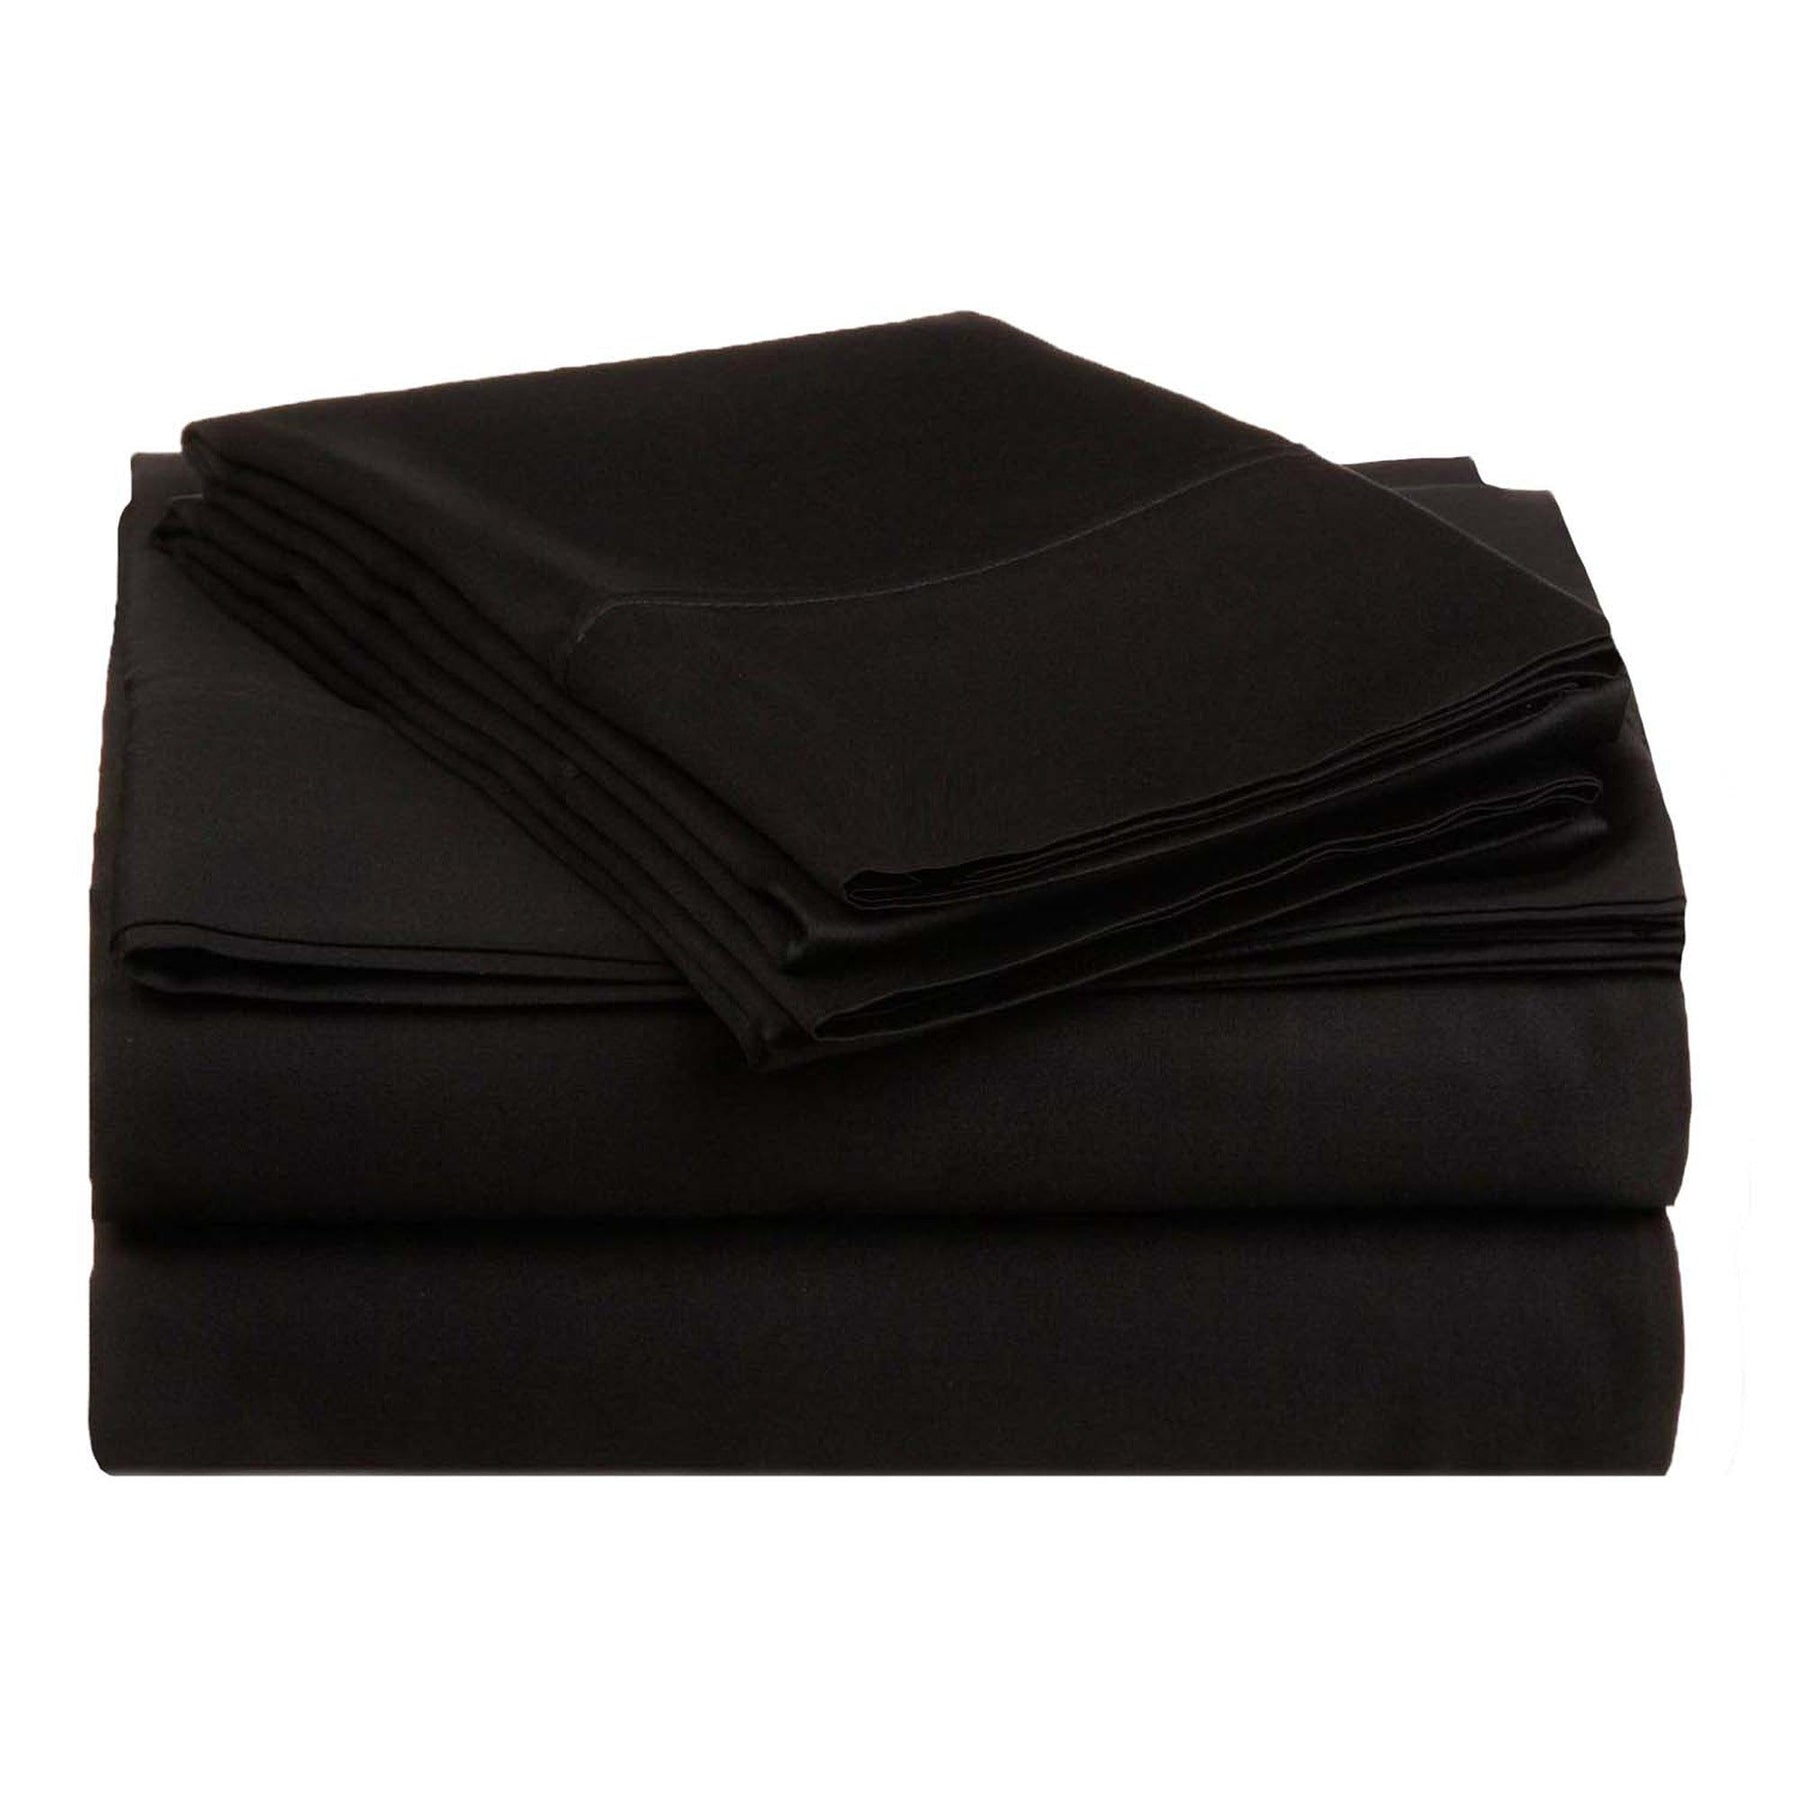  Superior Egyptian Cotton 530 Thread Count Solid Sheet Set - Black